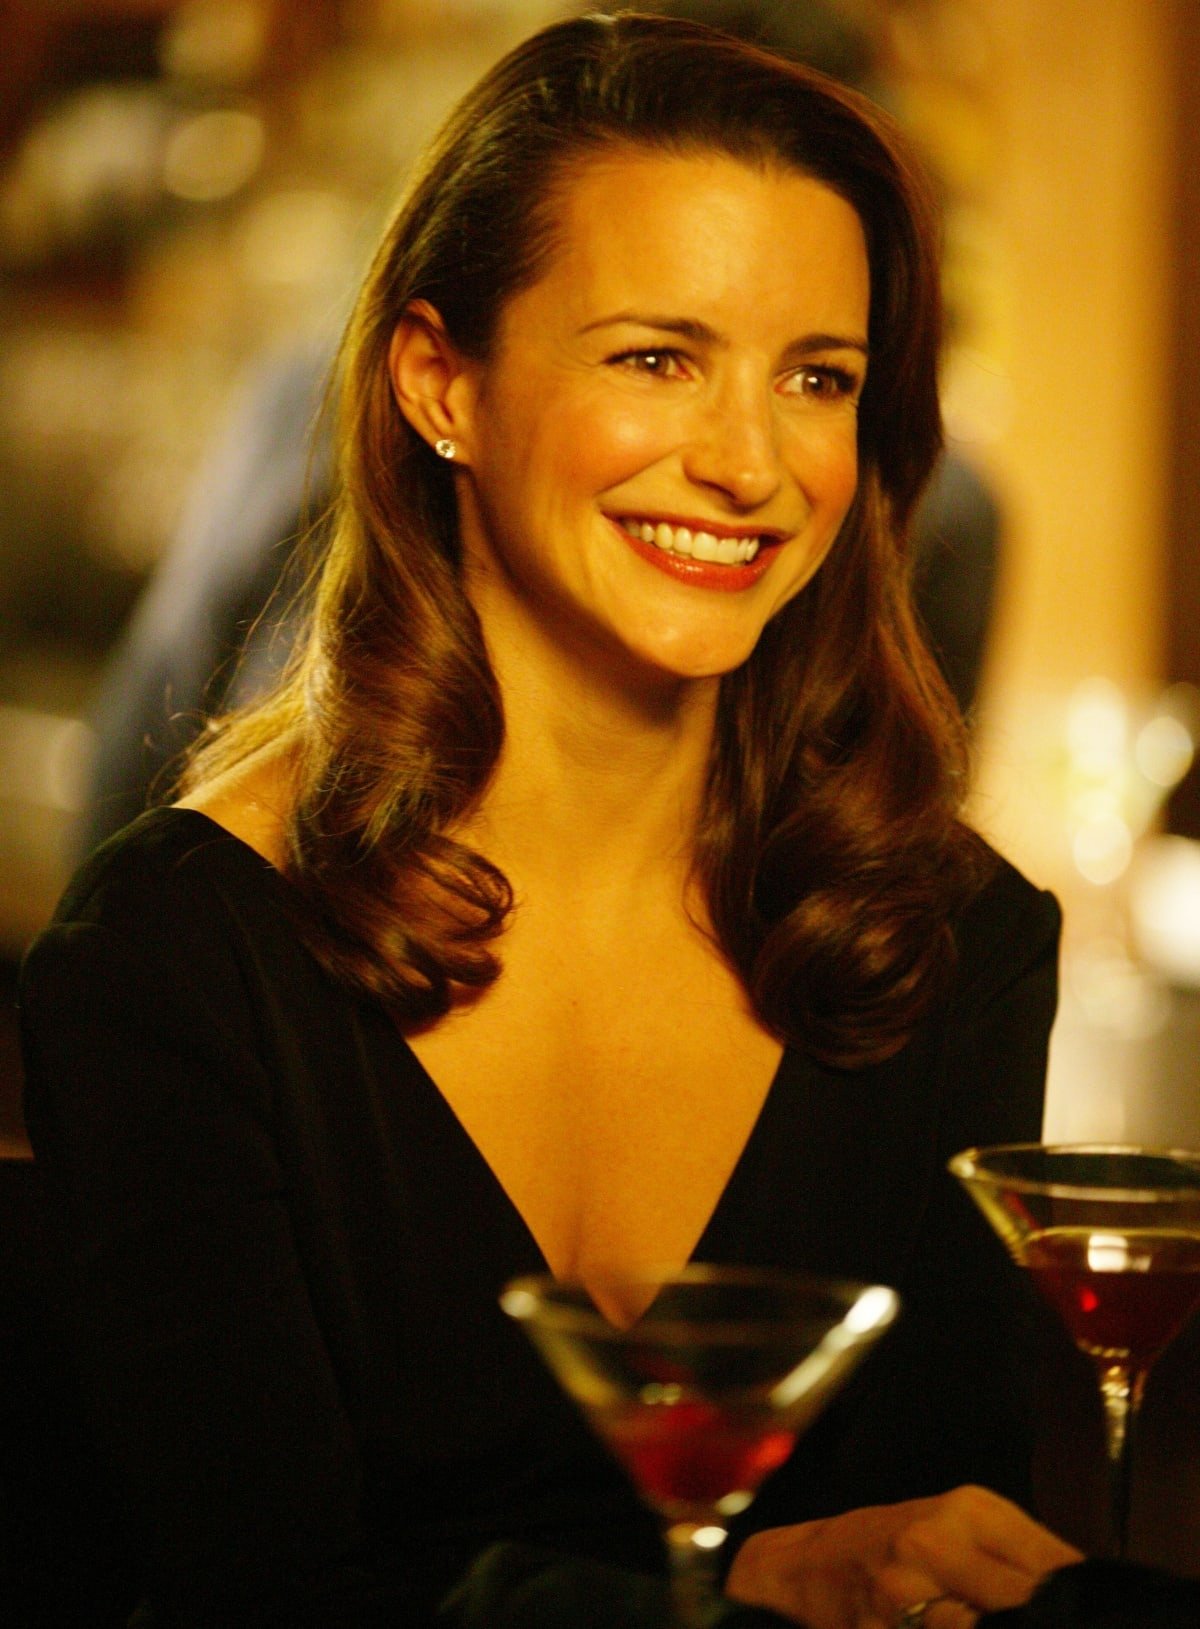 Kristin Davis as Charlotte York in the romantic comedy-drama television series Sex and the City